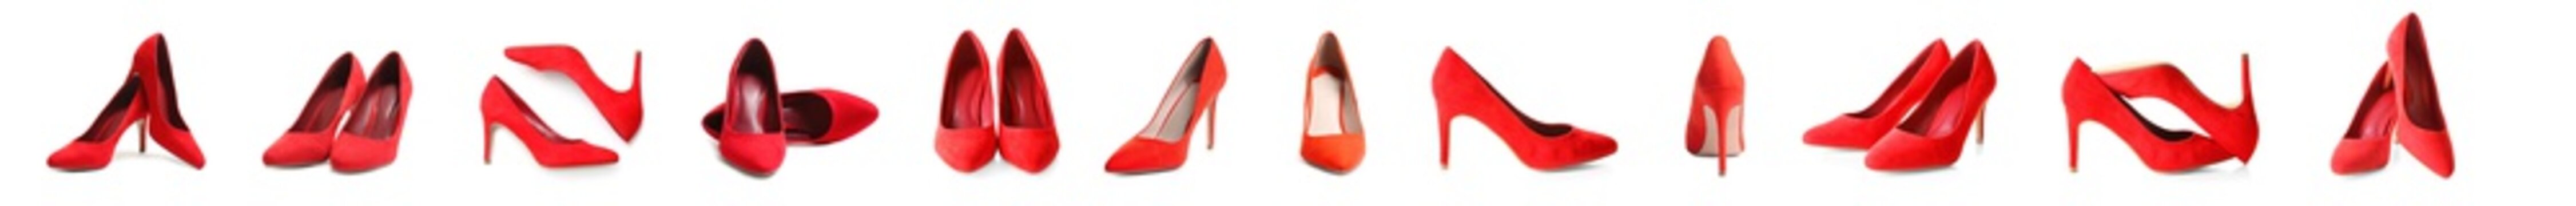 Pair of female shoes on white background